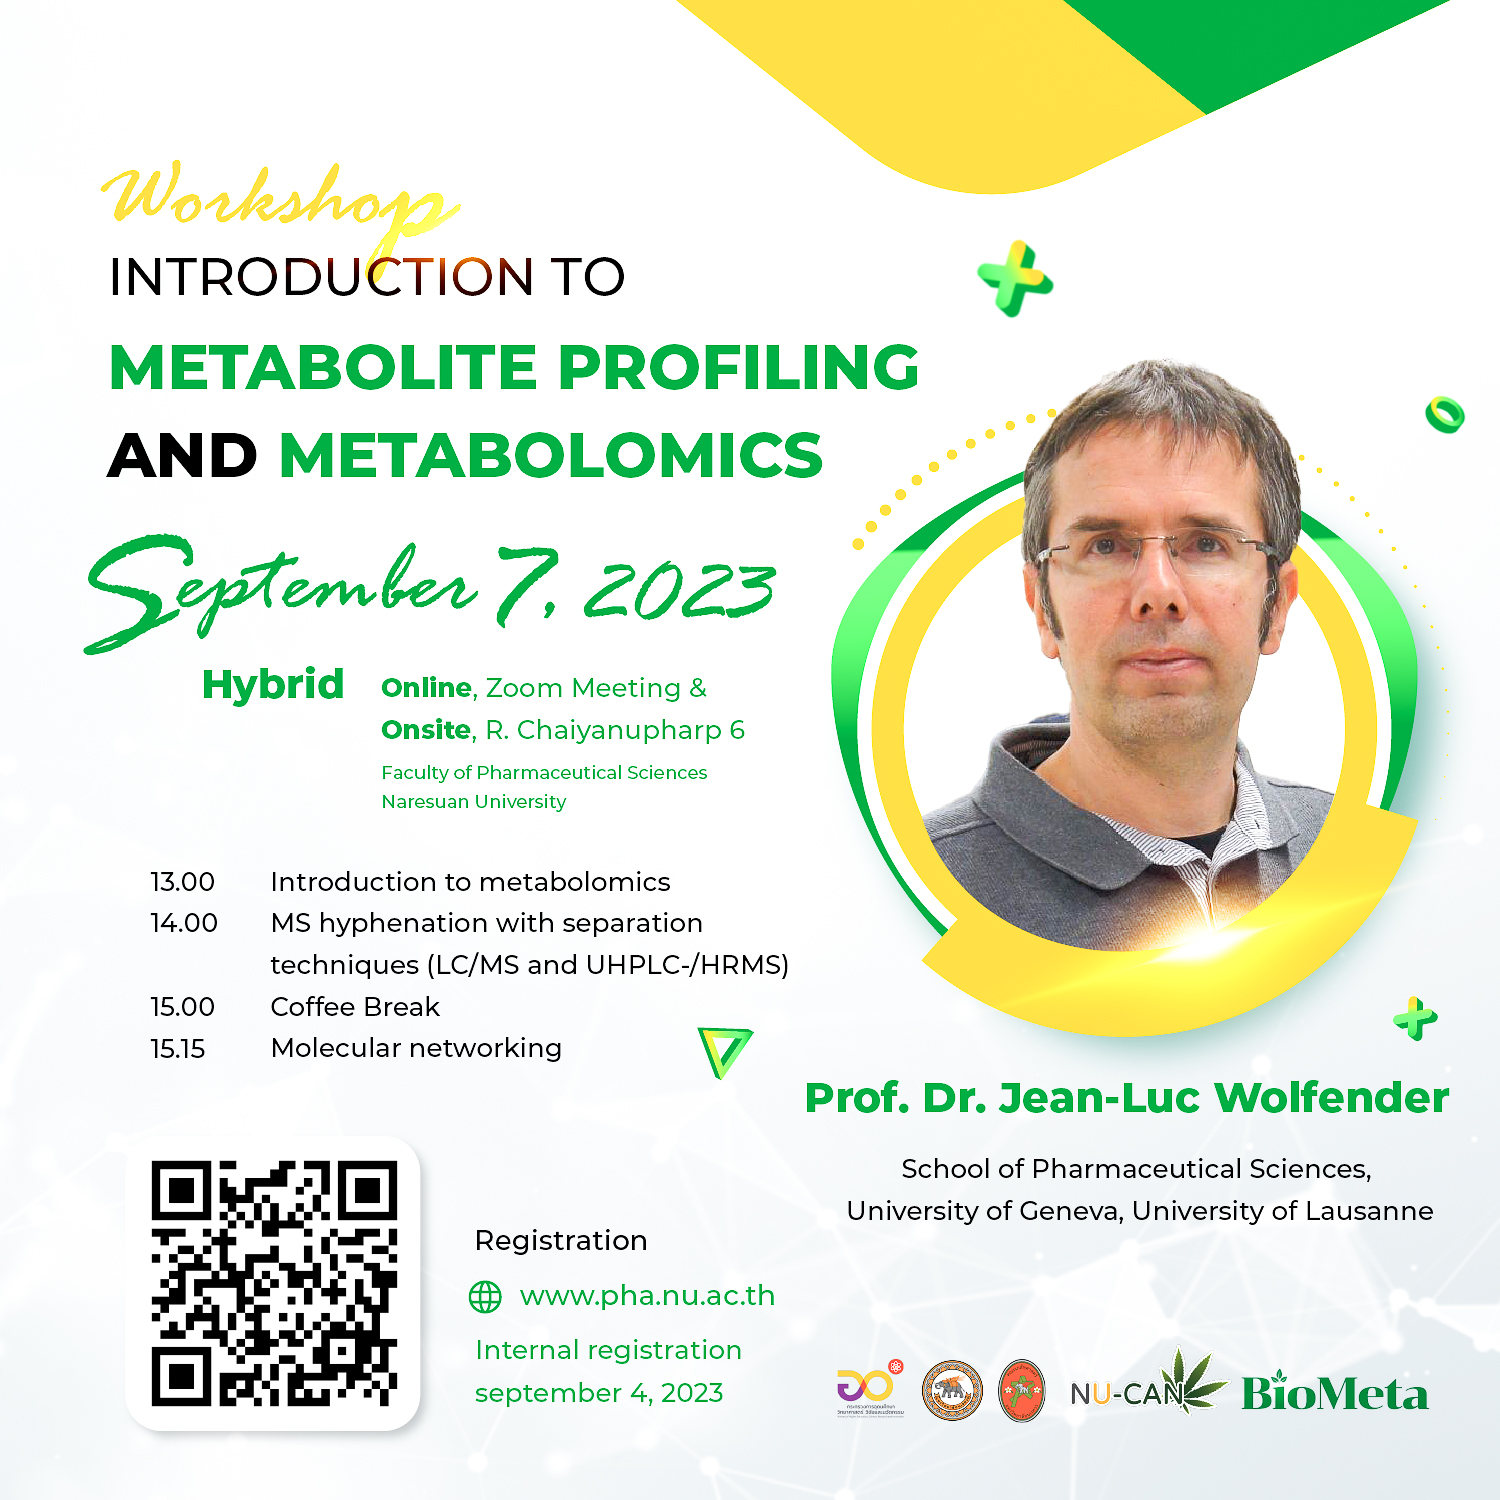 Workshop: Introduction to Metabolite Profiling and Metabolomics